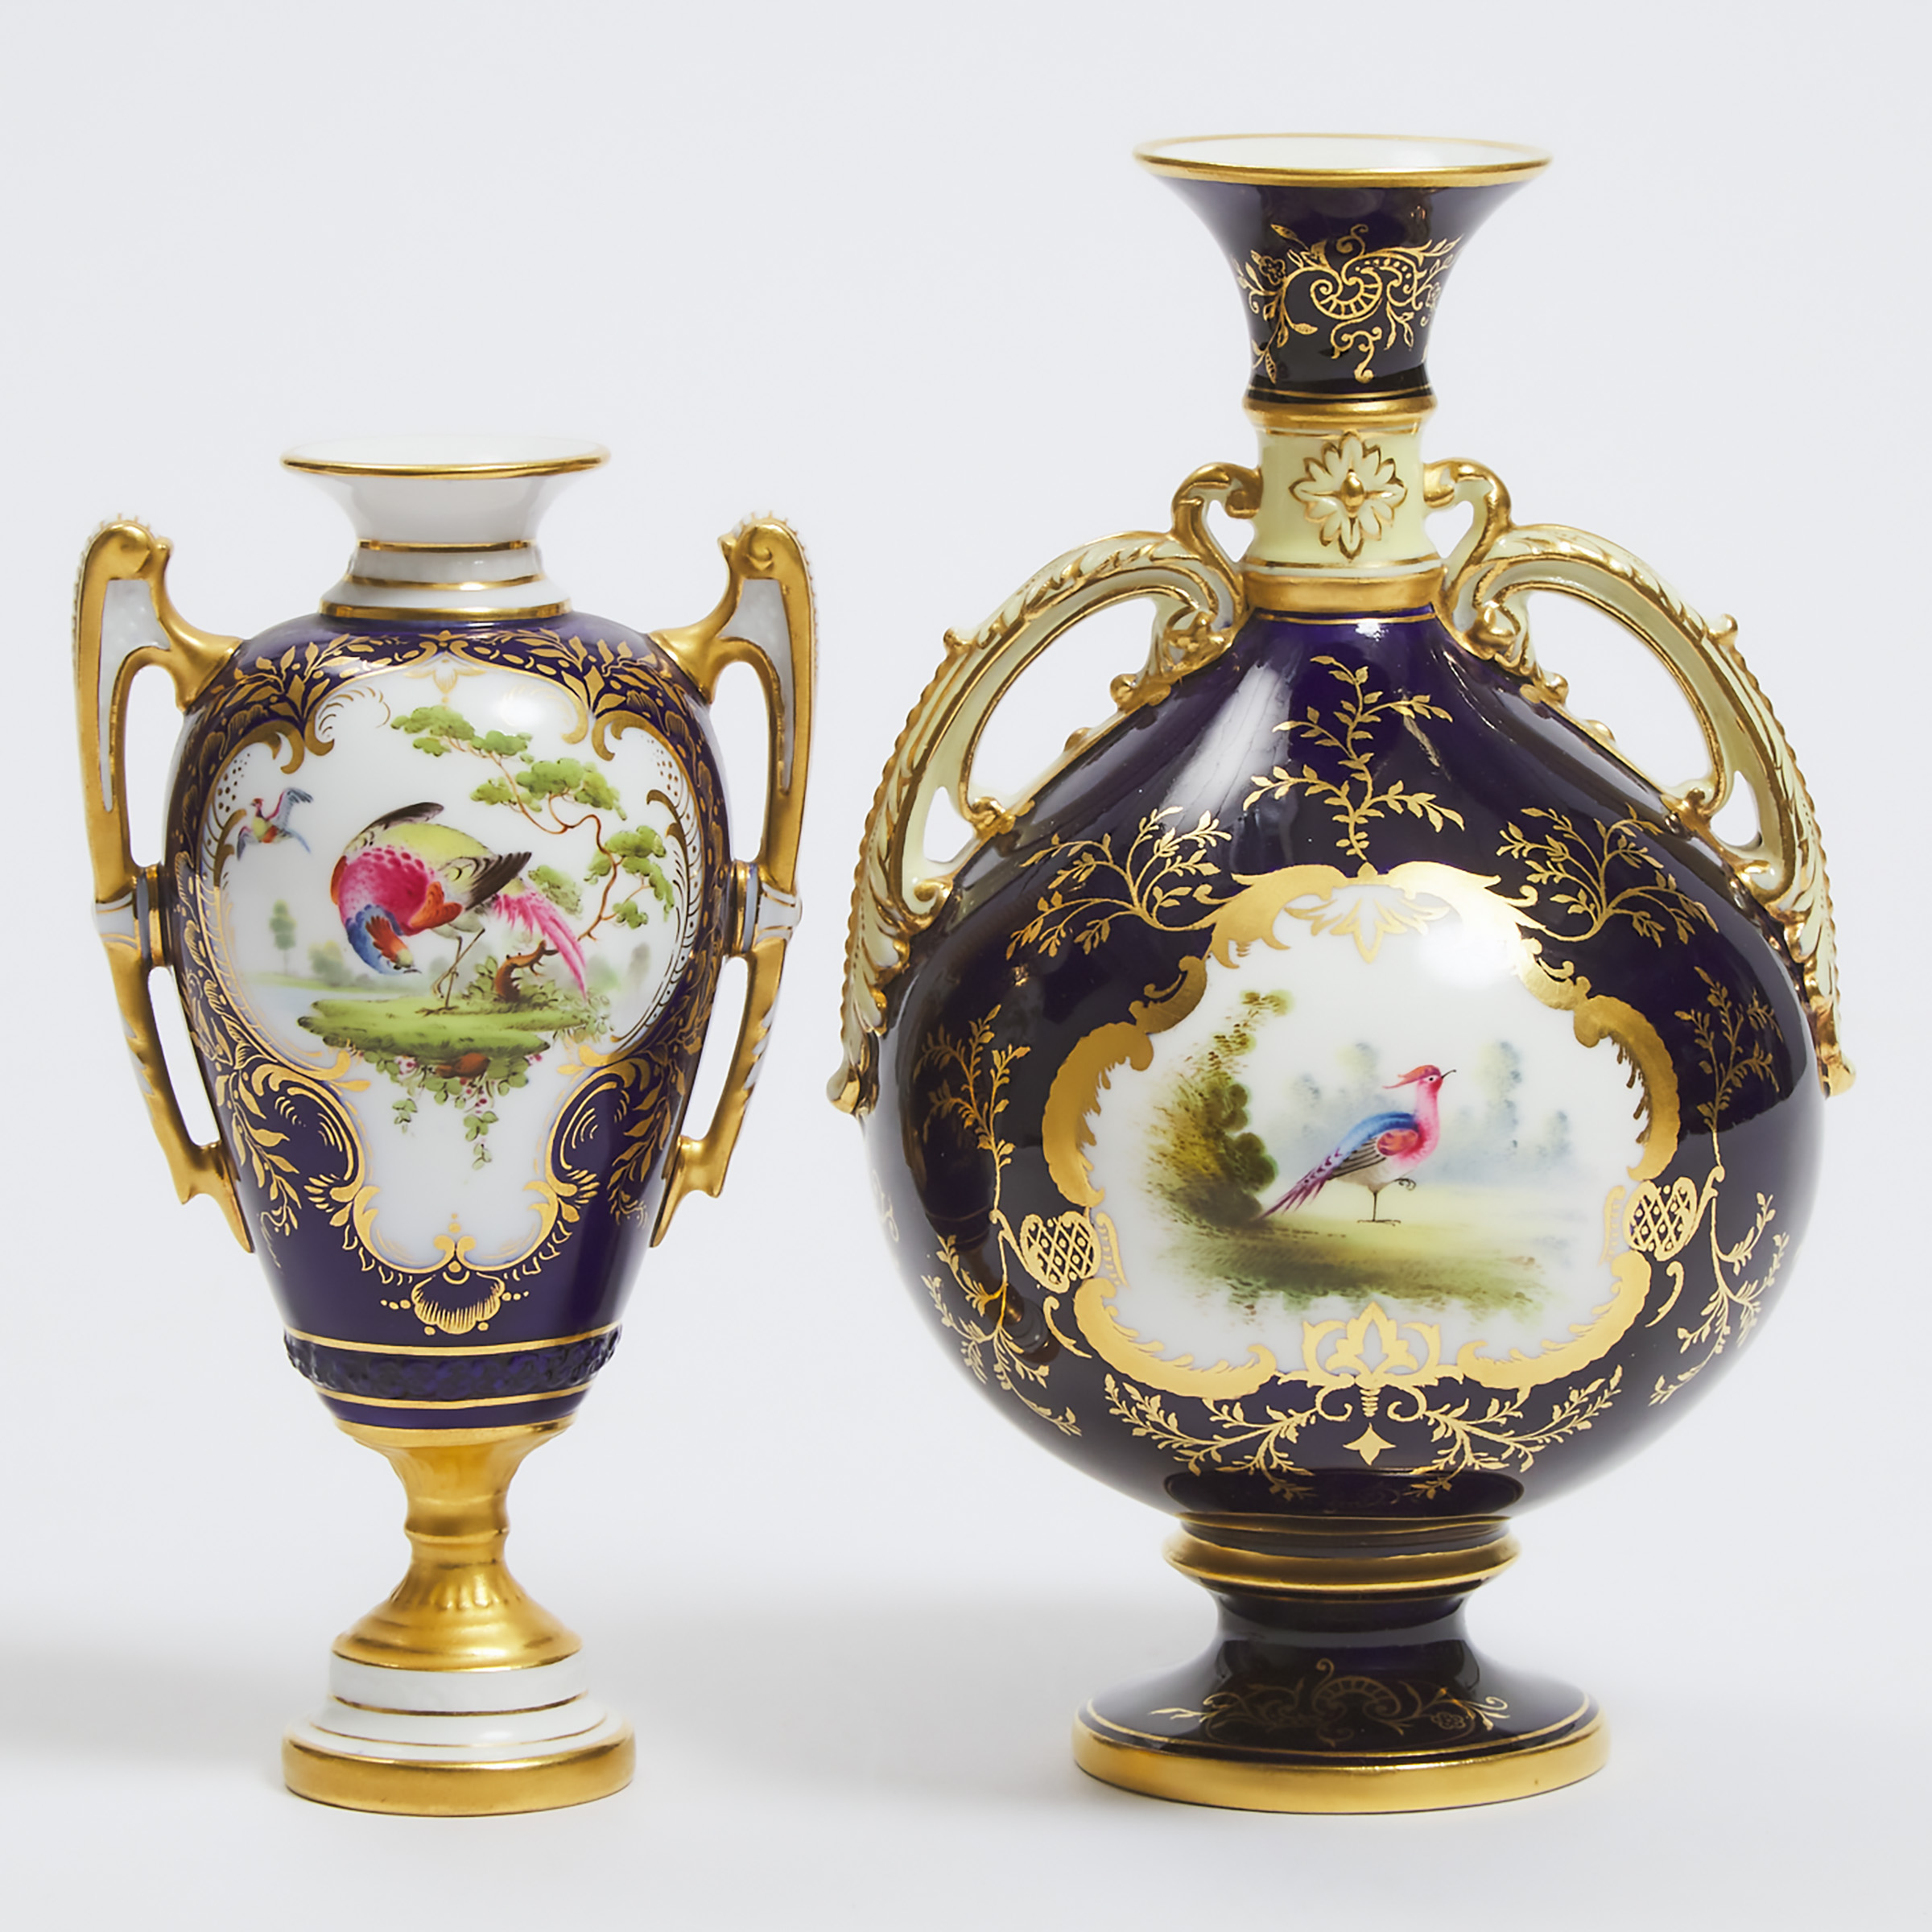 Two Coalport or Royal Worcester Exotic Bird Painted Two-Handled Cabinet Vases, c.1900 and 1896